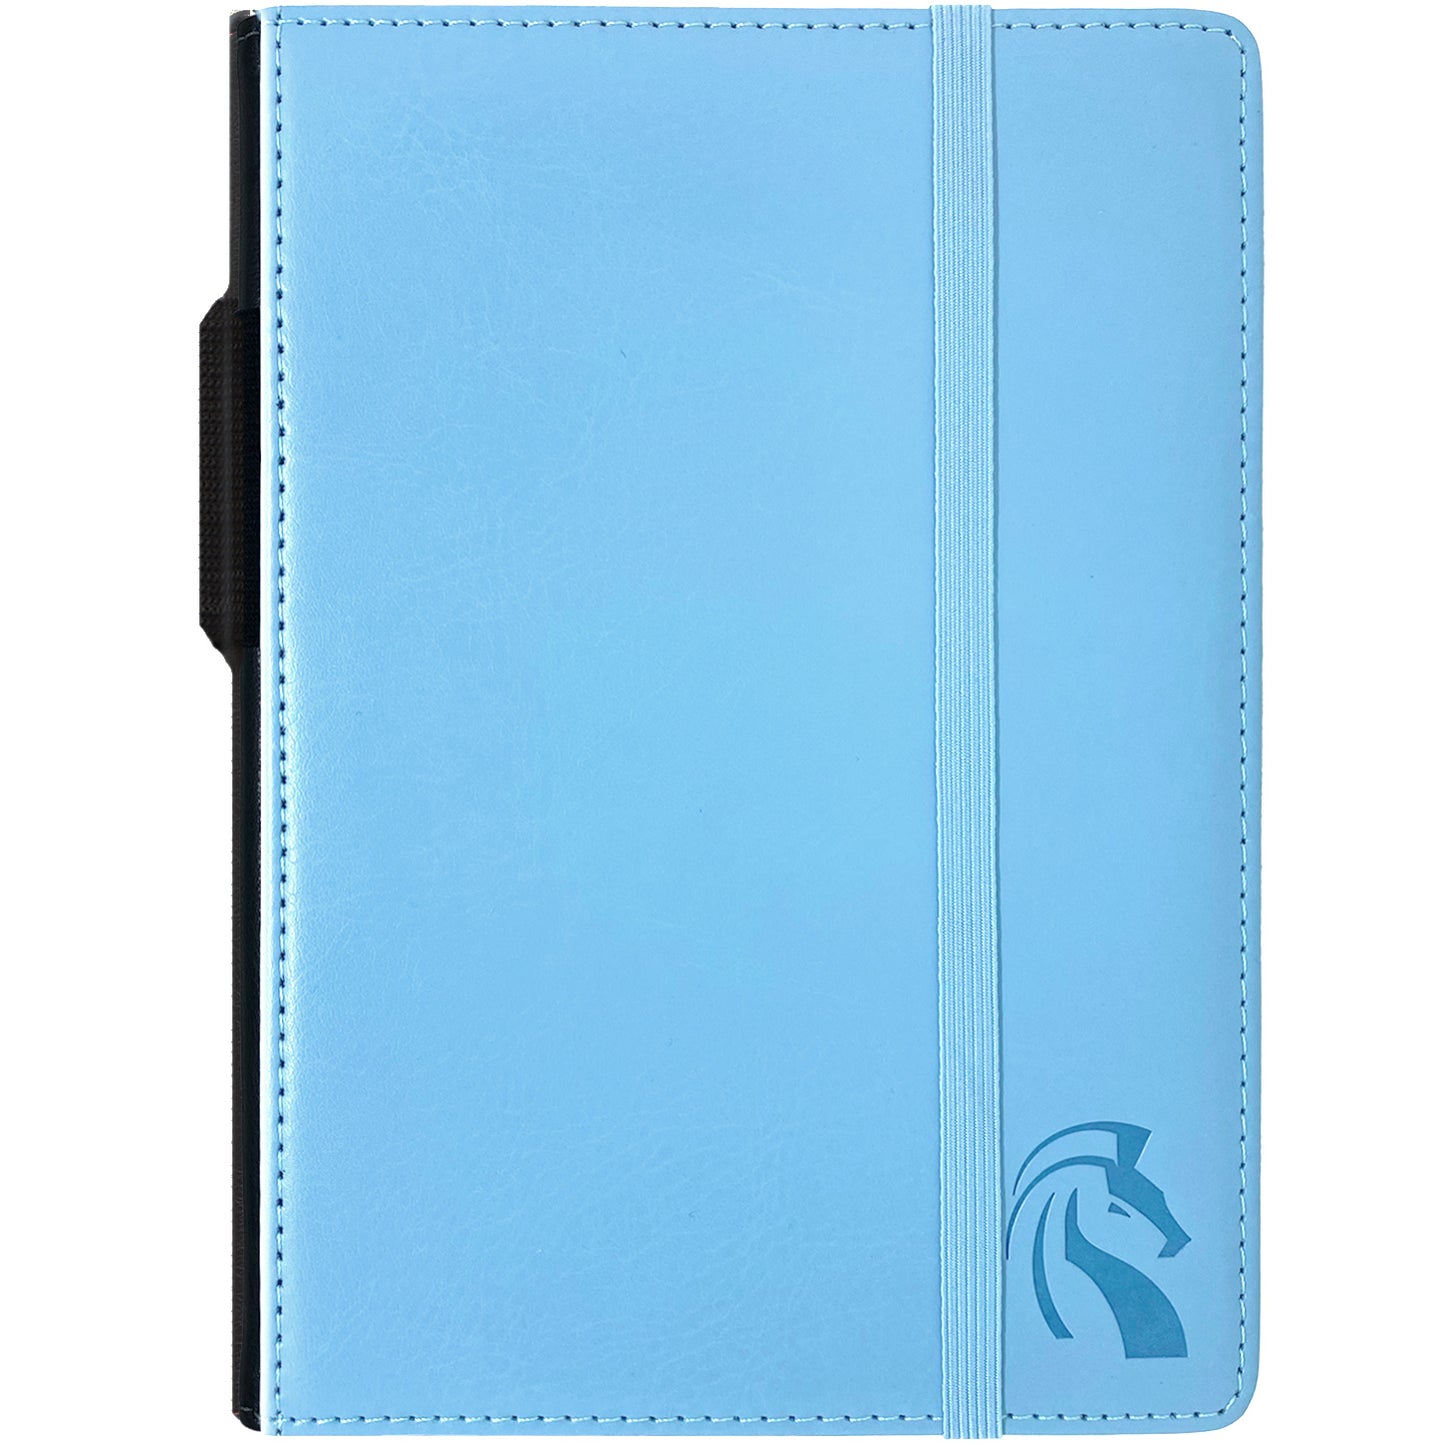 A5 Hardcover Journal Notebook - Light Blue Faux Leather